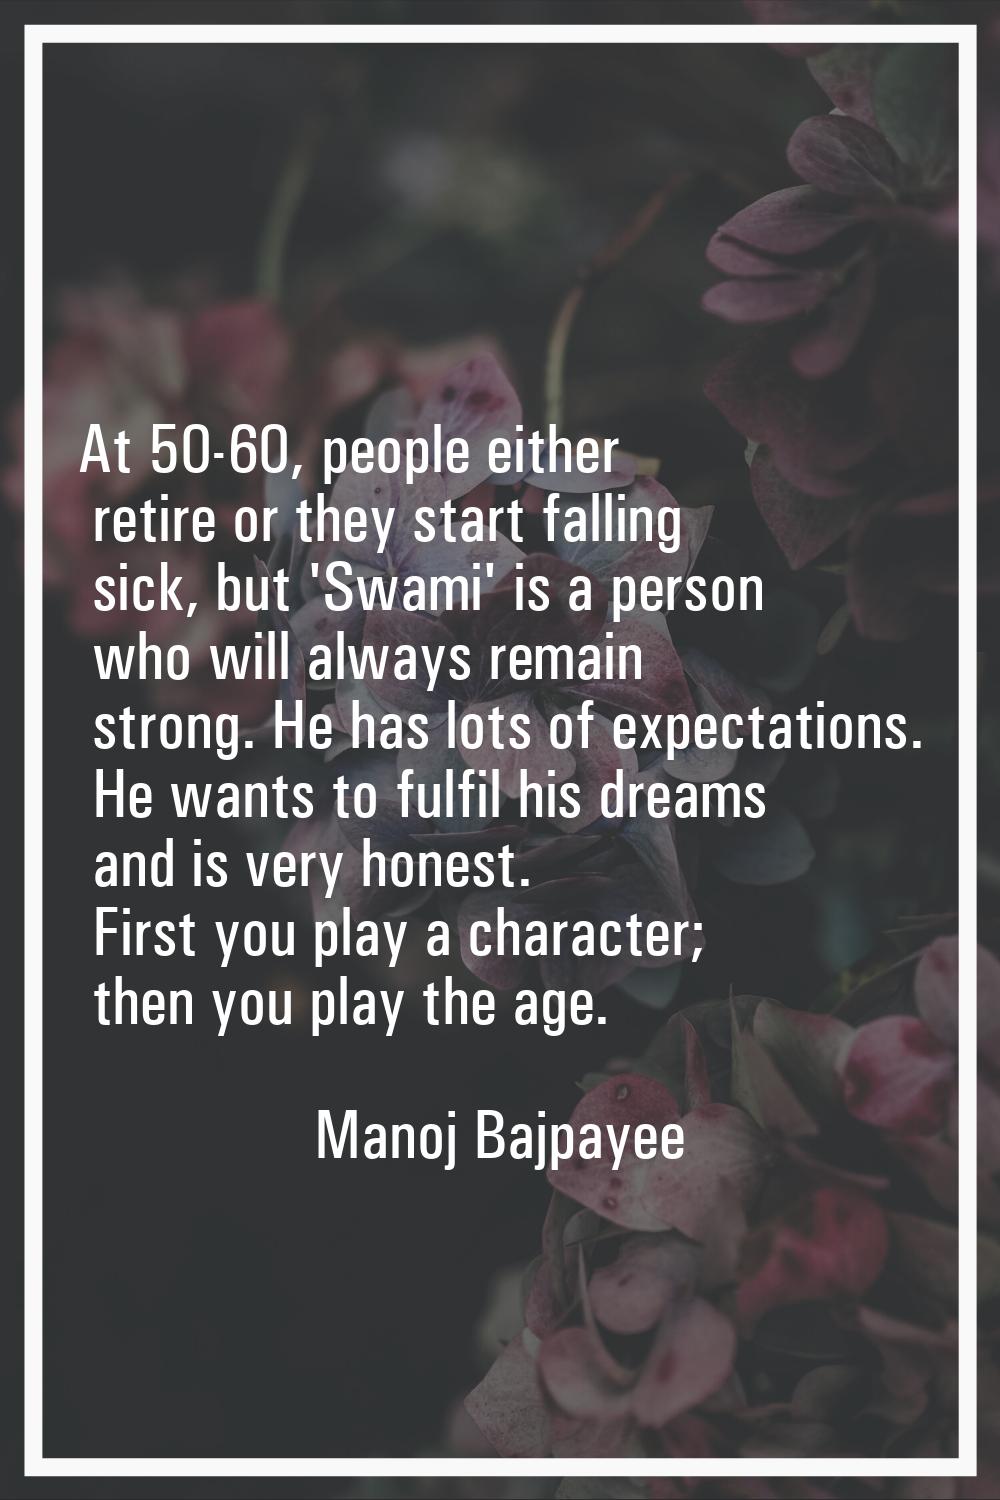 At 50-60, people either retire or they start falling sick, but 'Swami' is a person who will always 